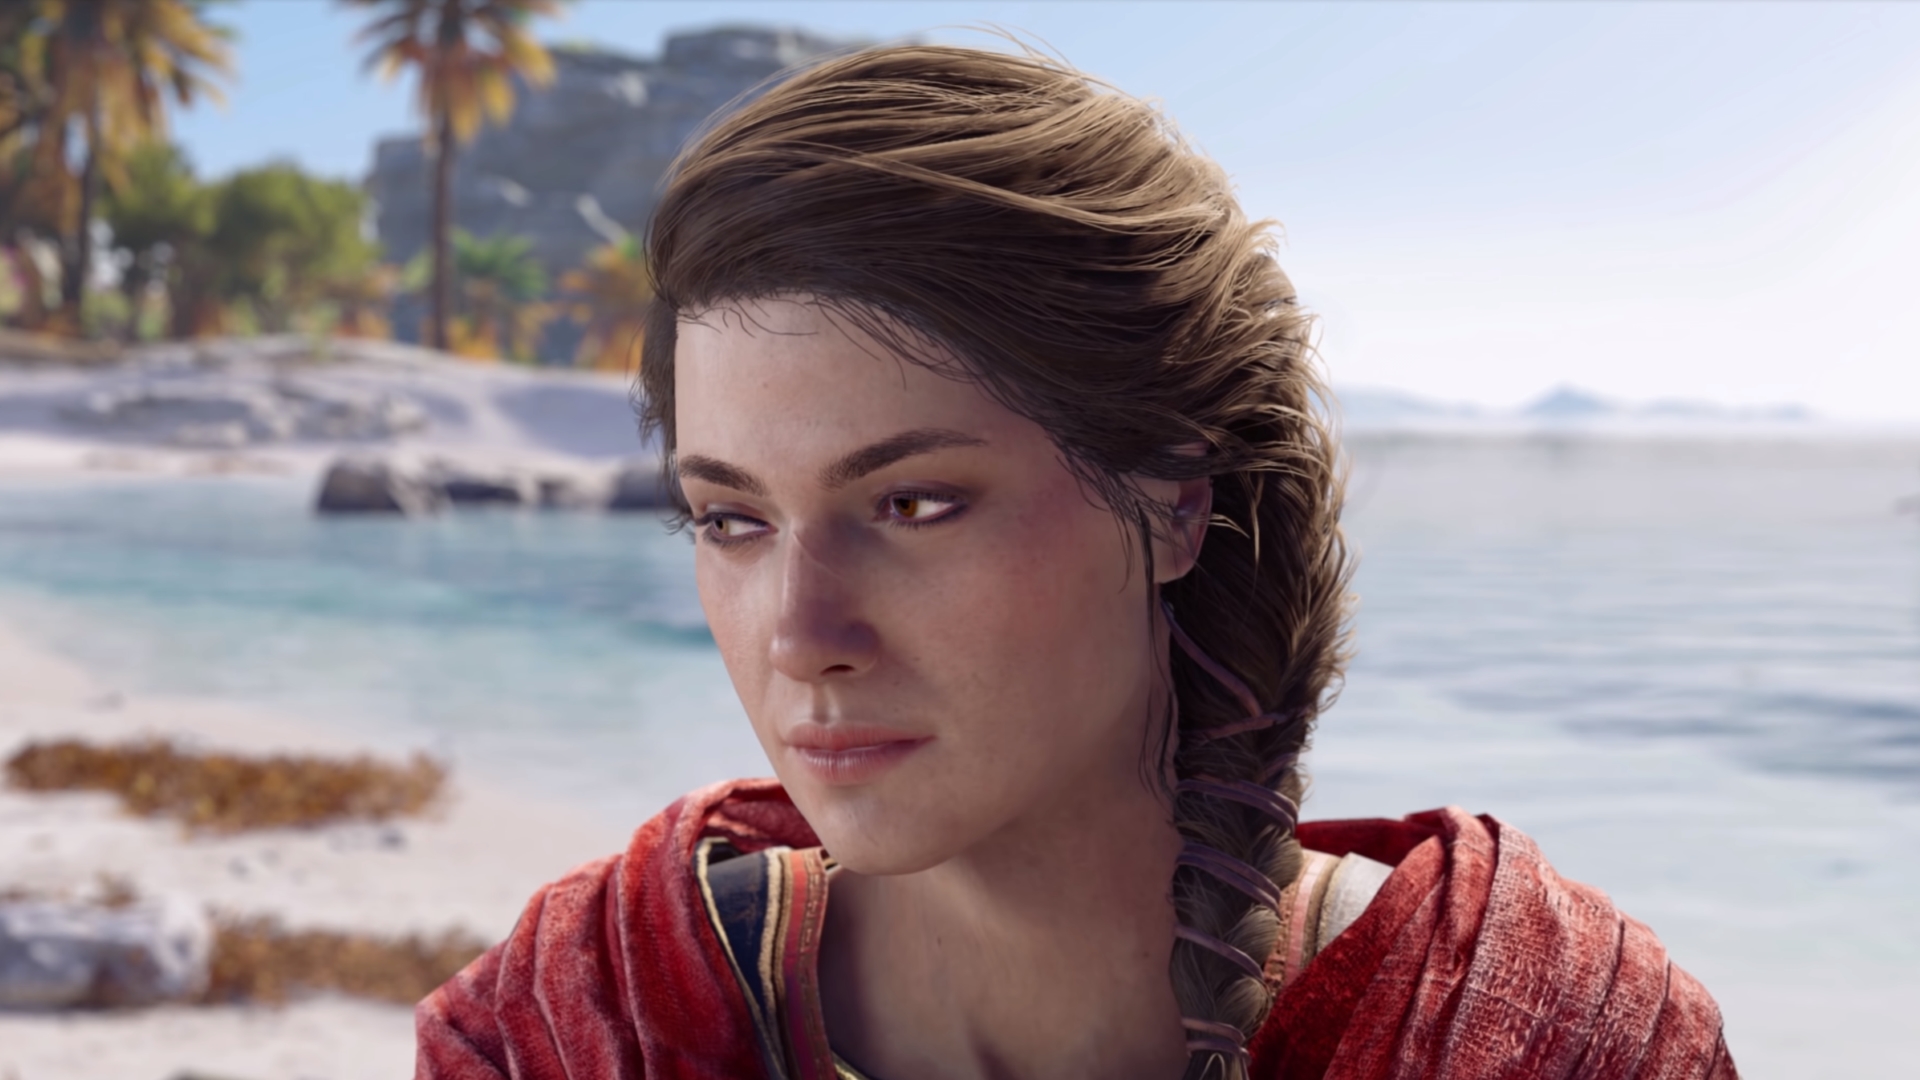 amd-raises-its-game-giving-away-free-assassin-s-creed-odyssey-codes